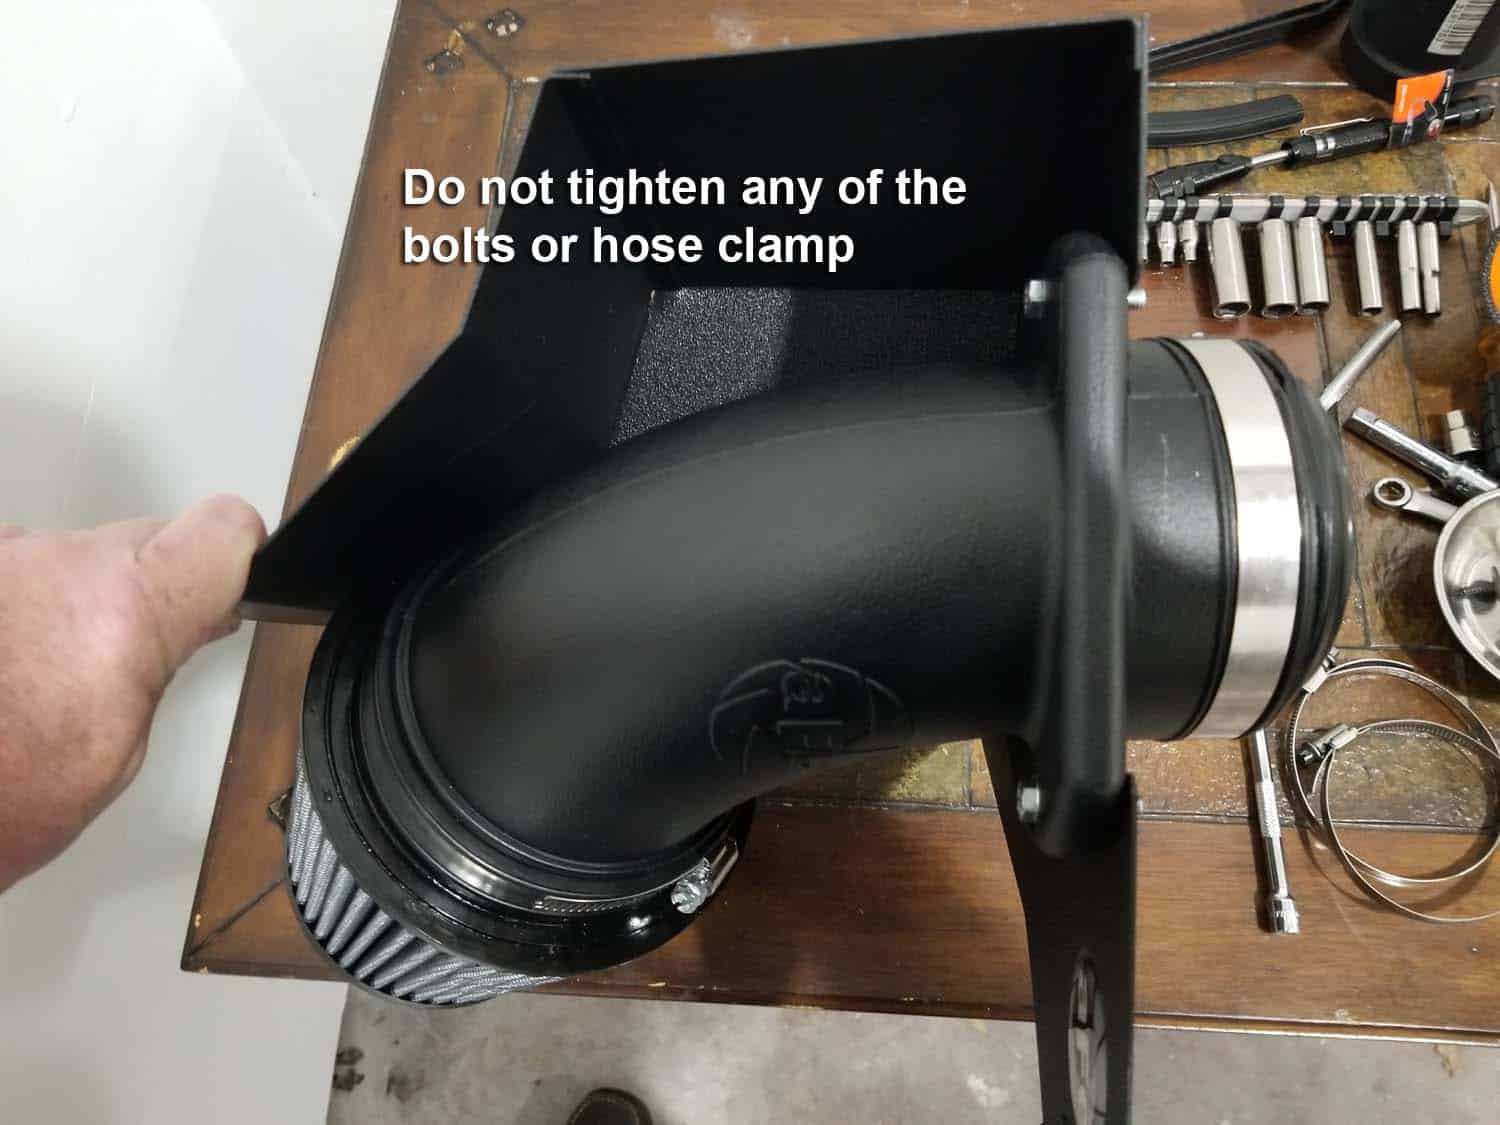 Do not tighten any bolts yet